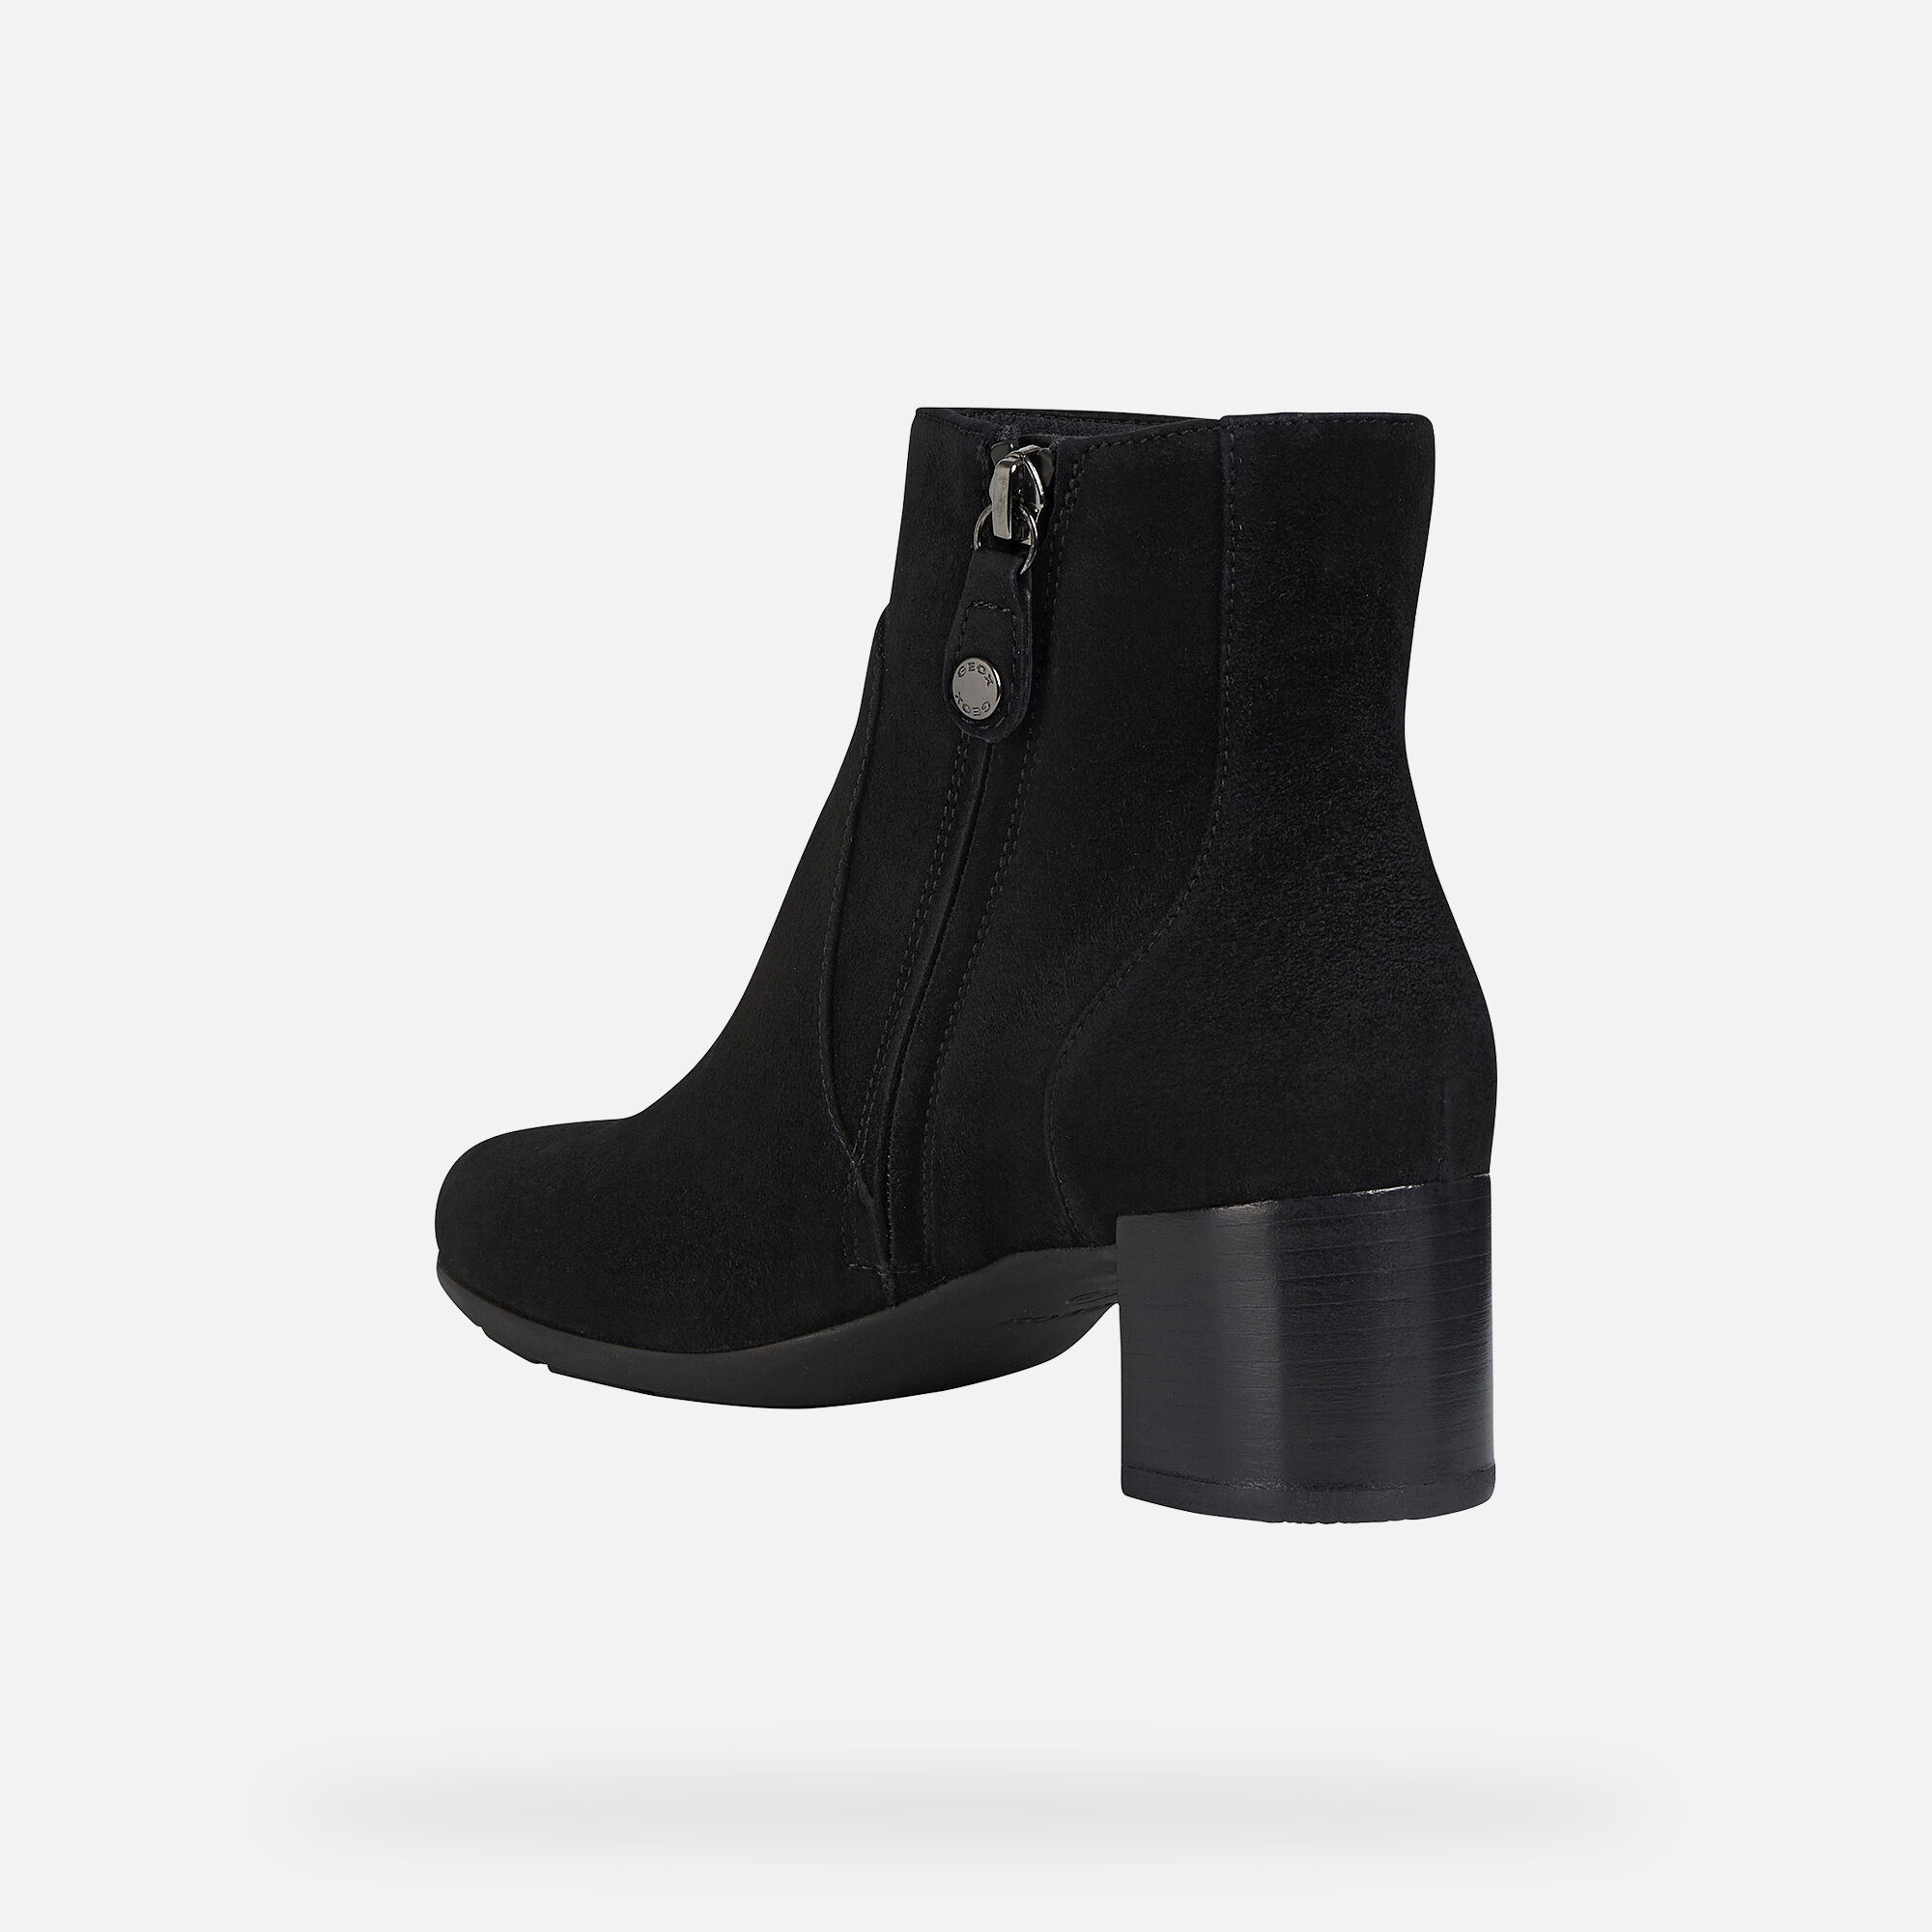 NEW ANNYA MID Woman: Black Ankle Boots 